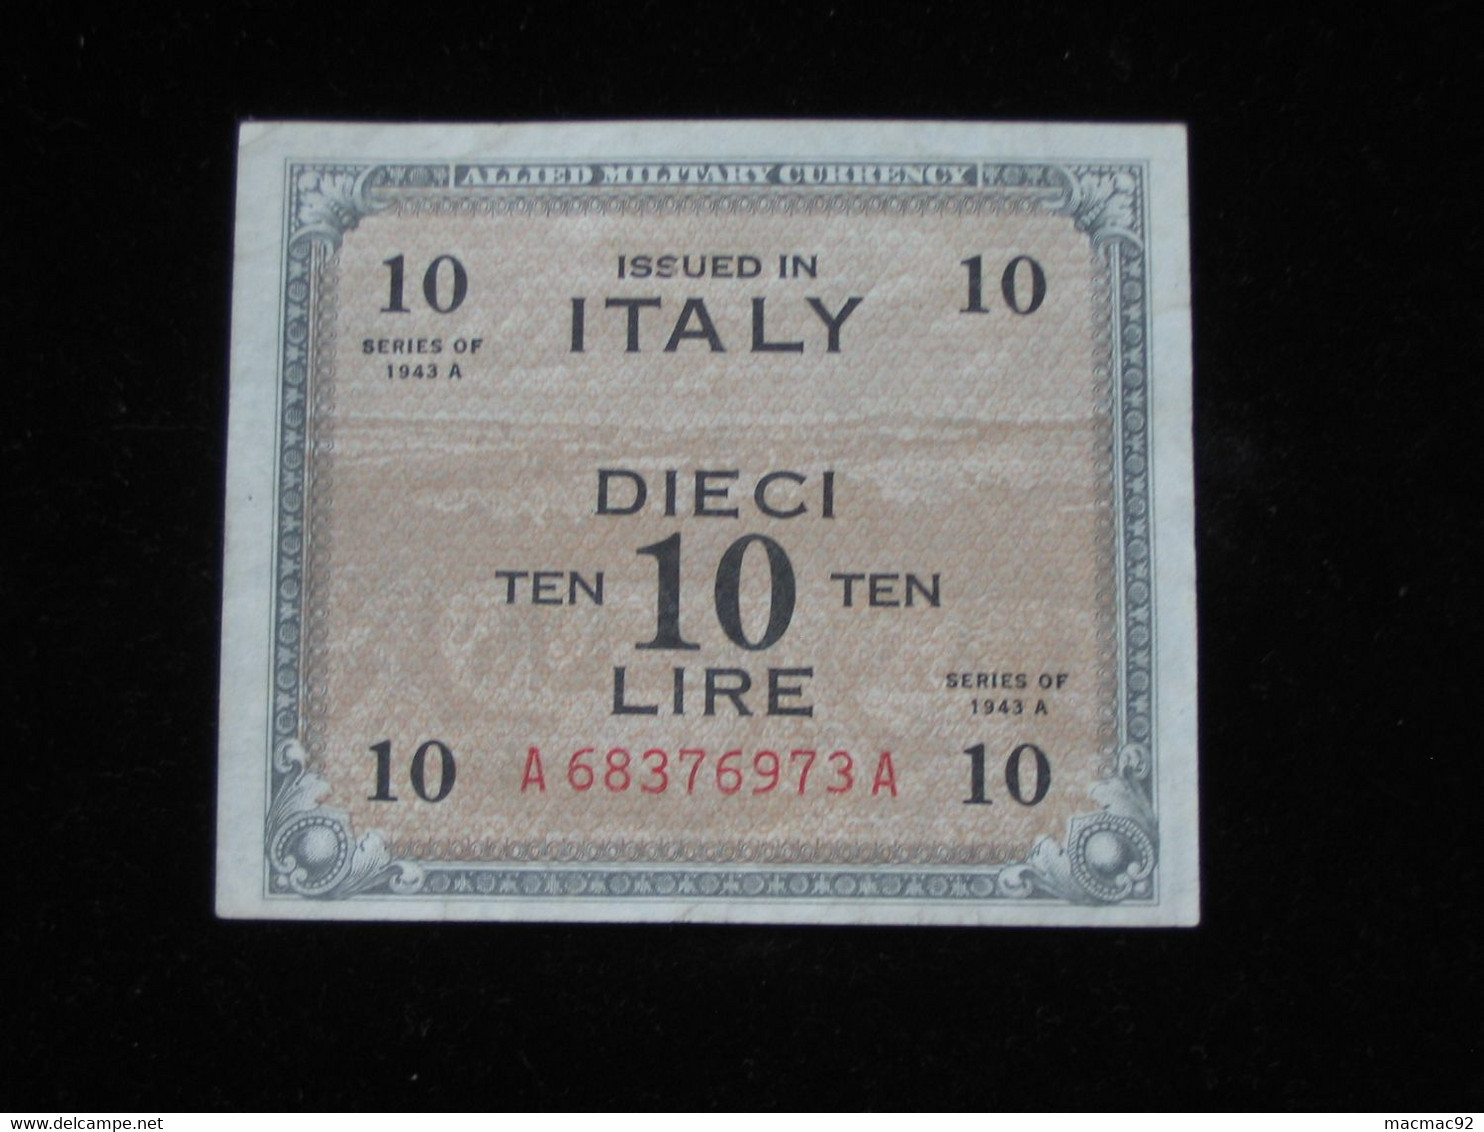 ITALIE - 10 Lire  Issued In ITALY - Allied Military Currency - Série 1943  **** EN ACHAT IMMEDIAT **** - Occupation Alliés Seconde Guerre Mondiale